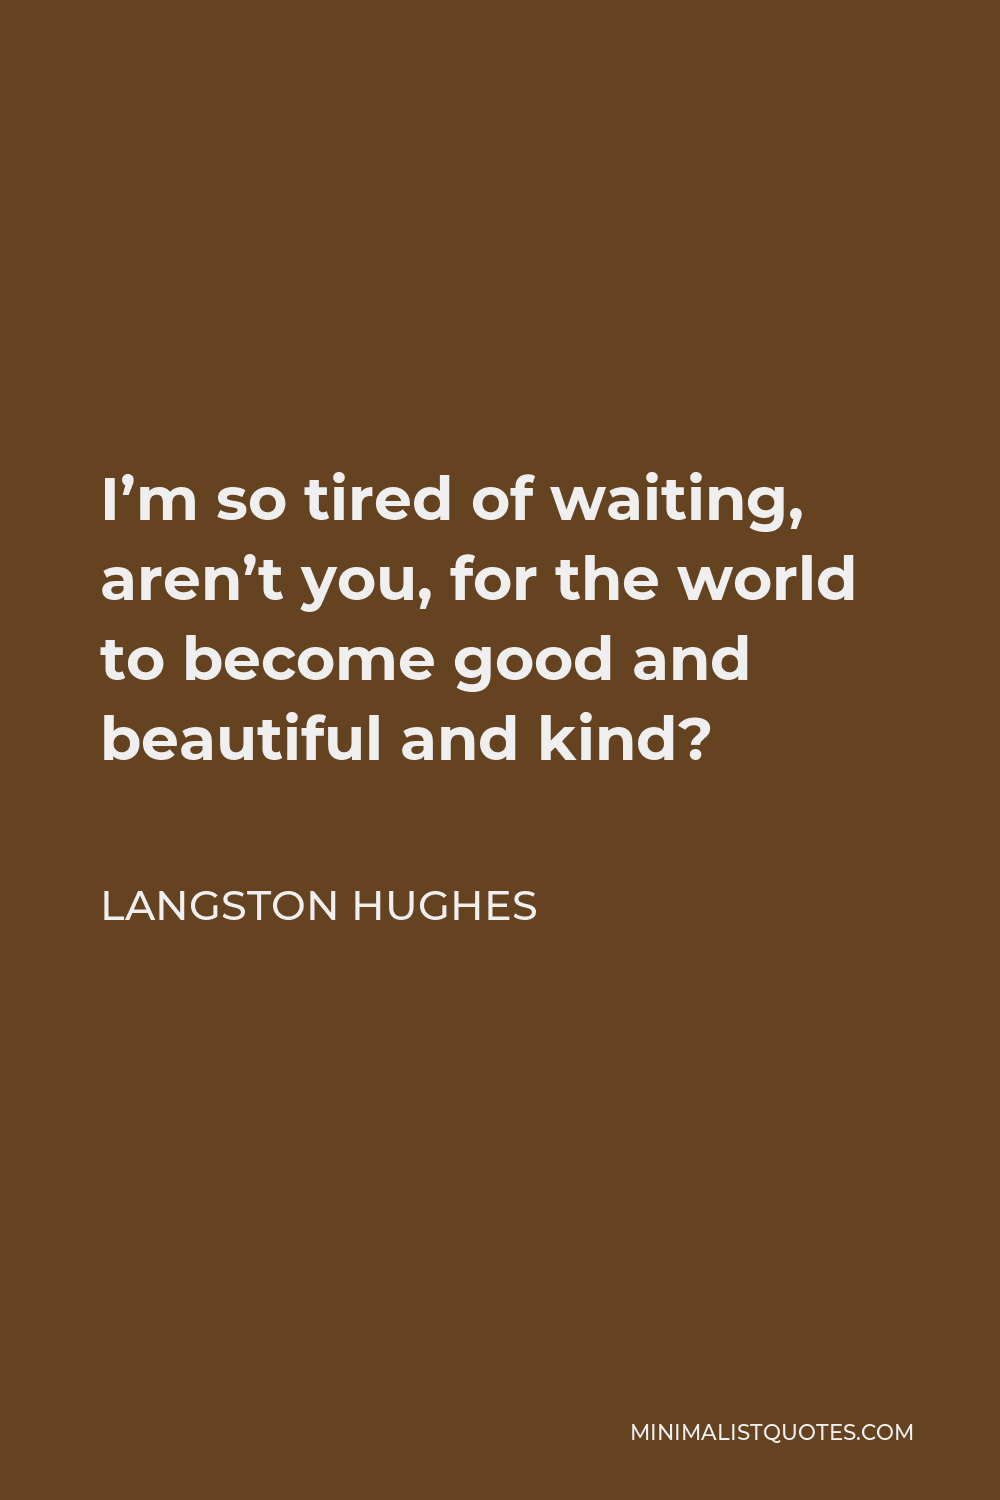 Langston Hughes Quote - I’m so tired of waiting, aren’t you, for the world to become good and beautiful and kind?